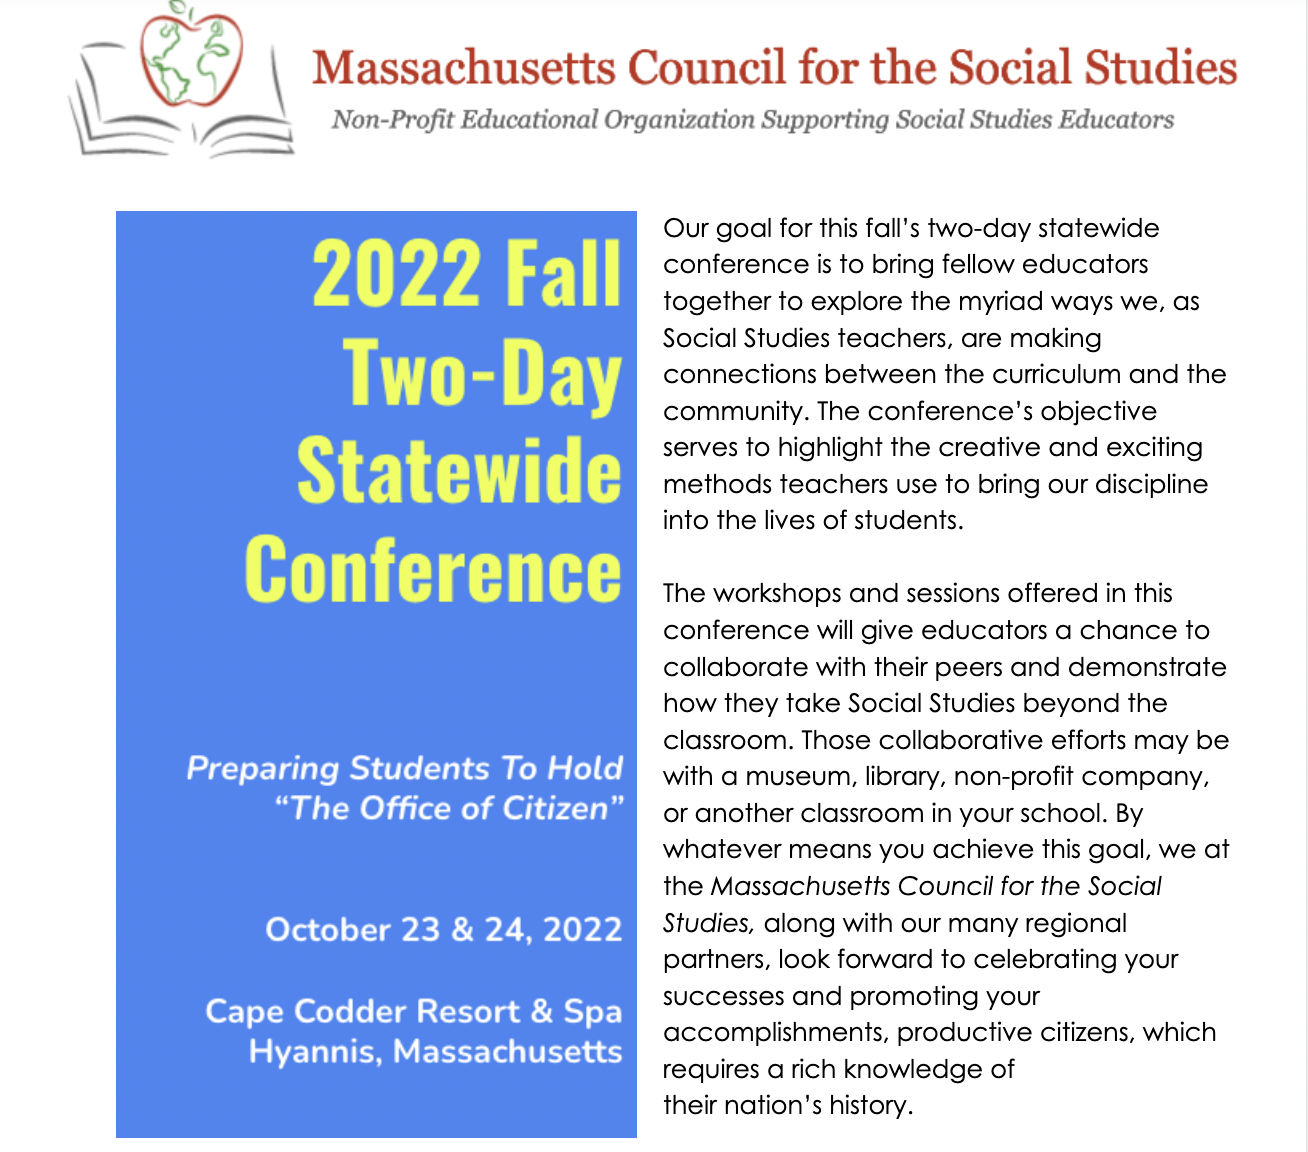 Conference program title page, "2022 Fall Two-Day Statewide Conference"